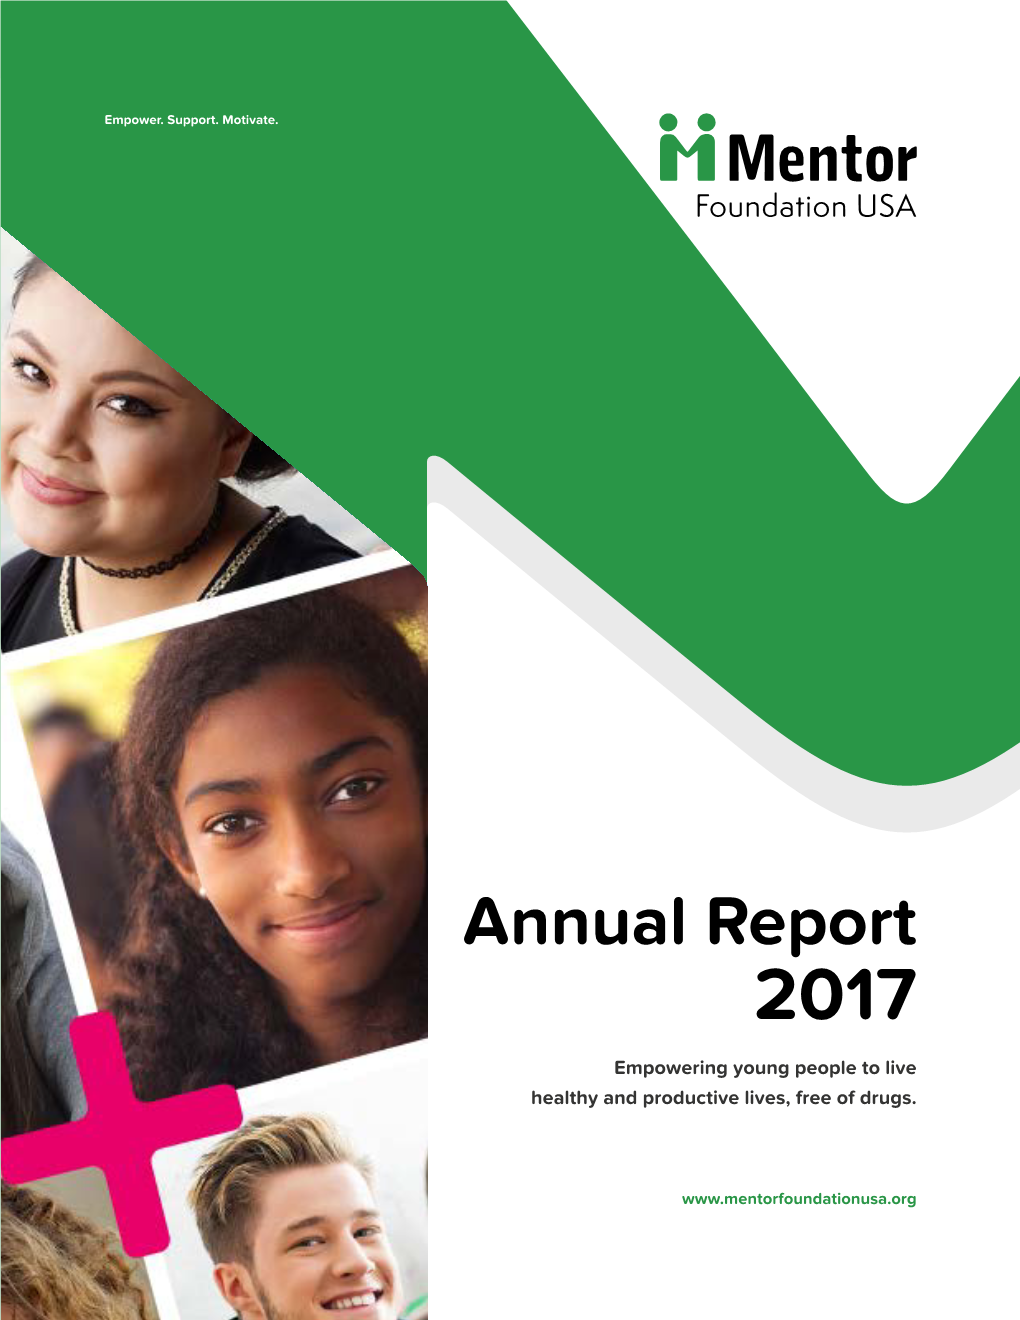 Annual Report 2017 Empowering Young People to Live Healthy and Productive Lives, Free of Drugs